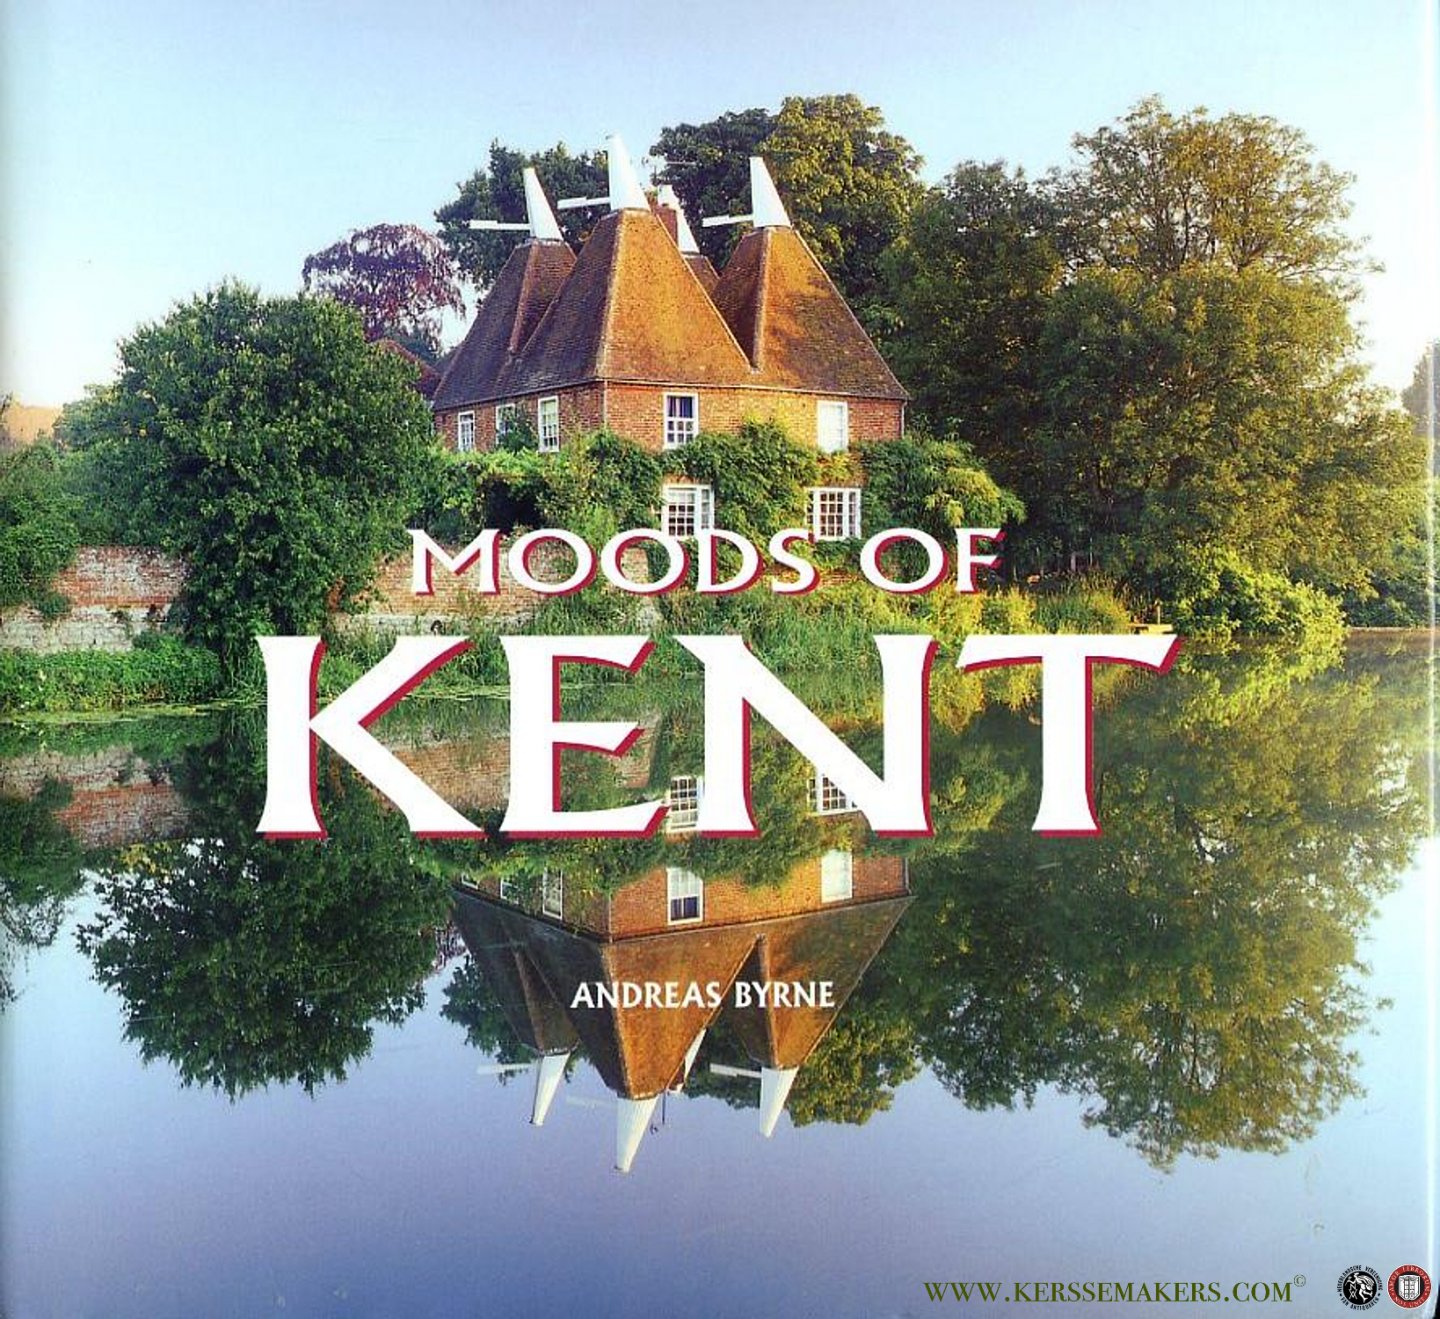 BYRNE, Andreas - Moods of Kent